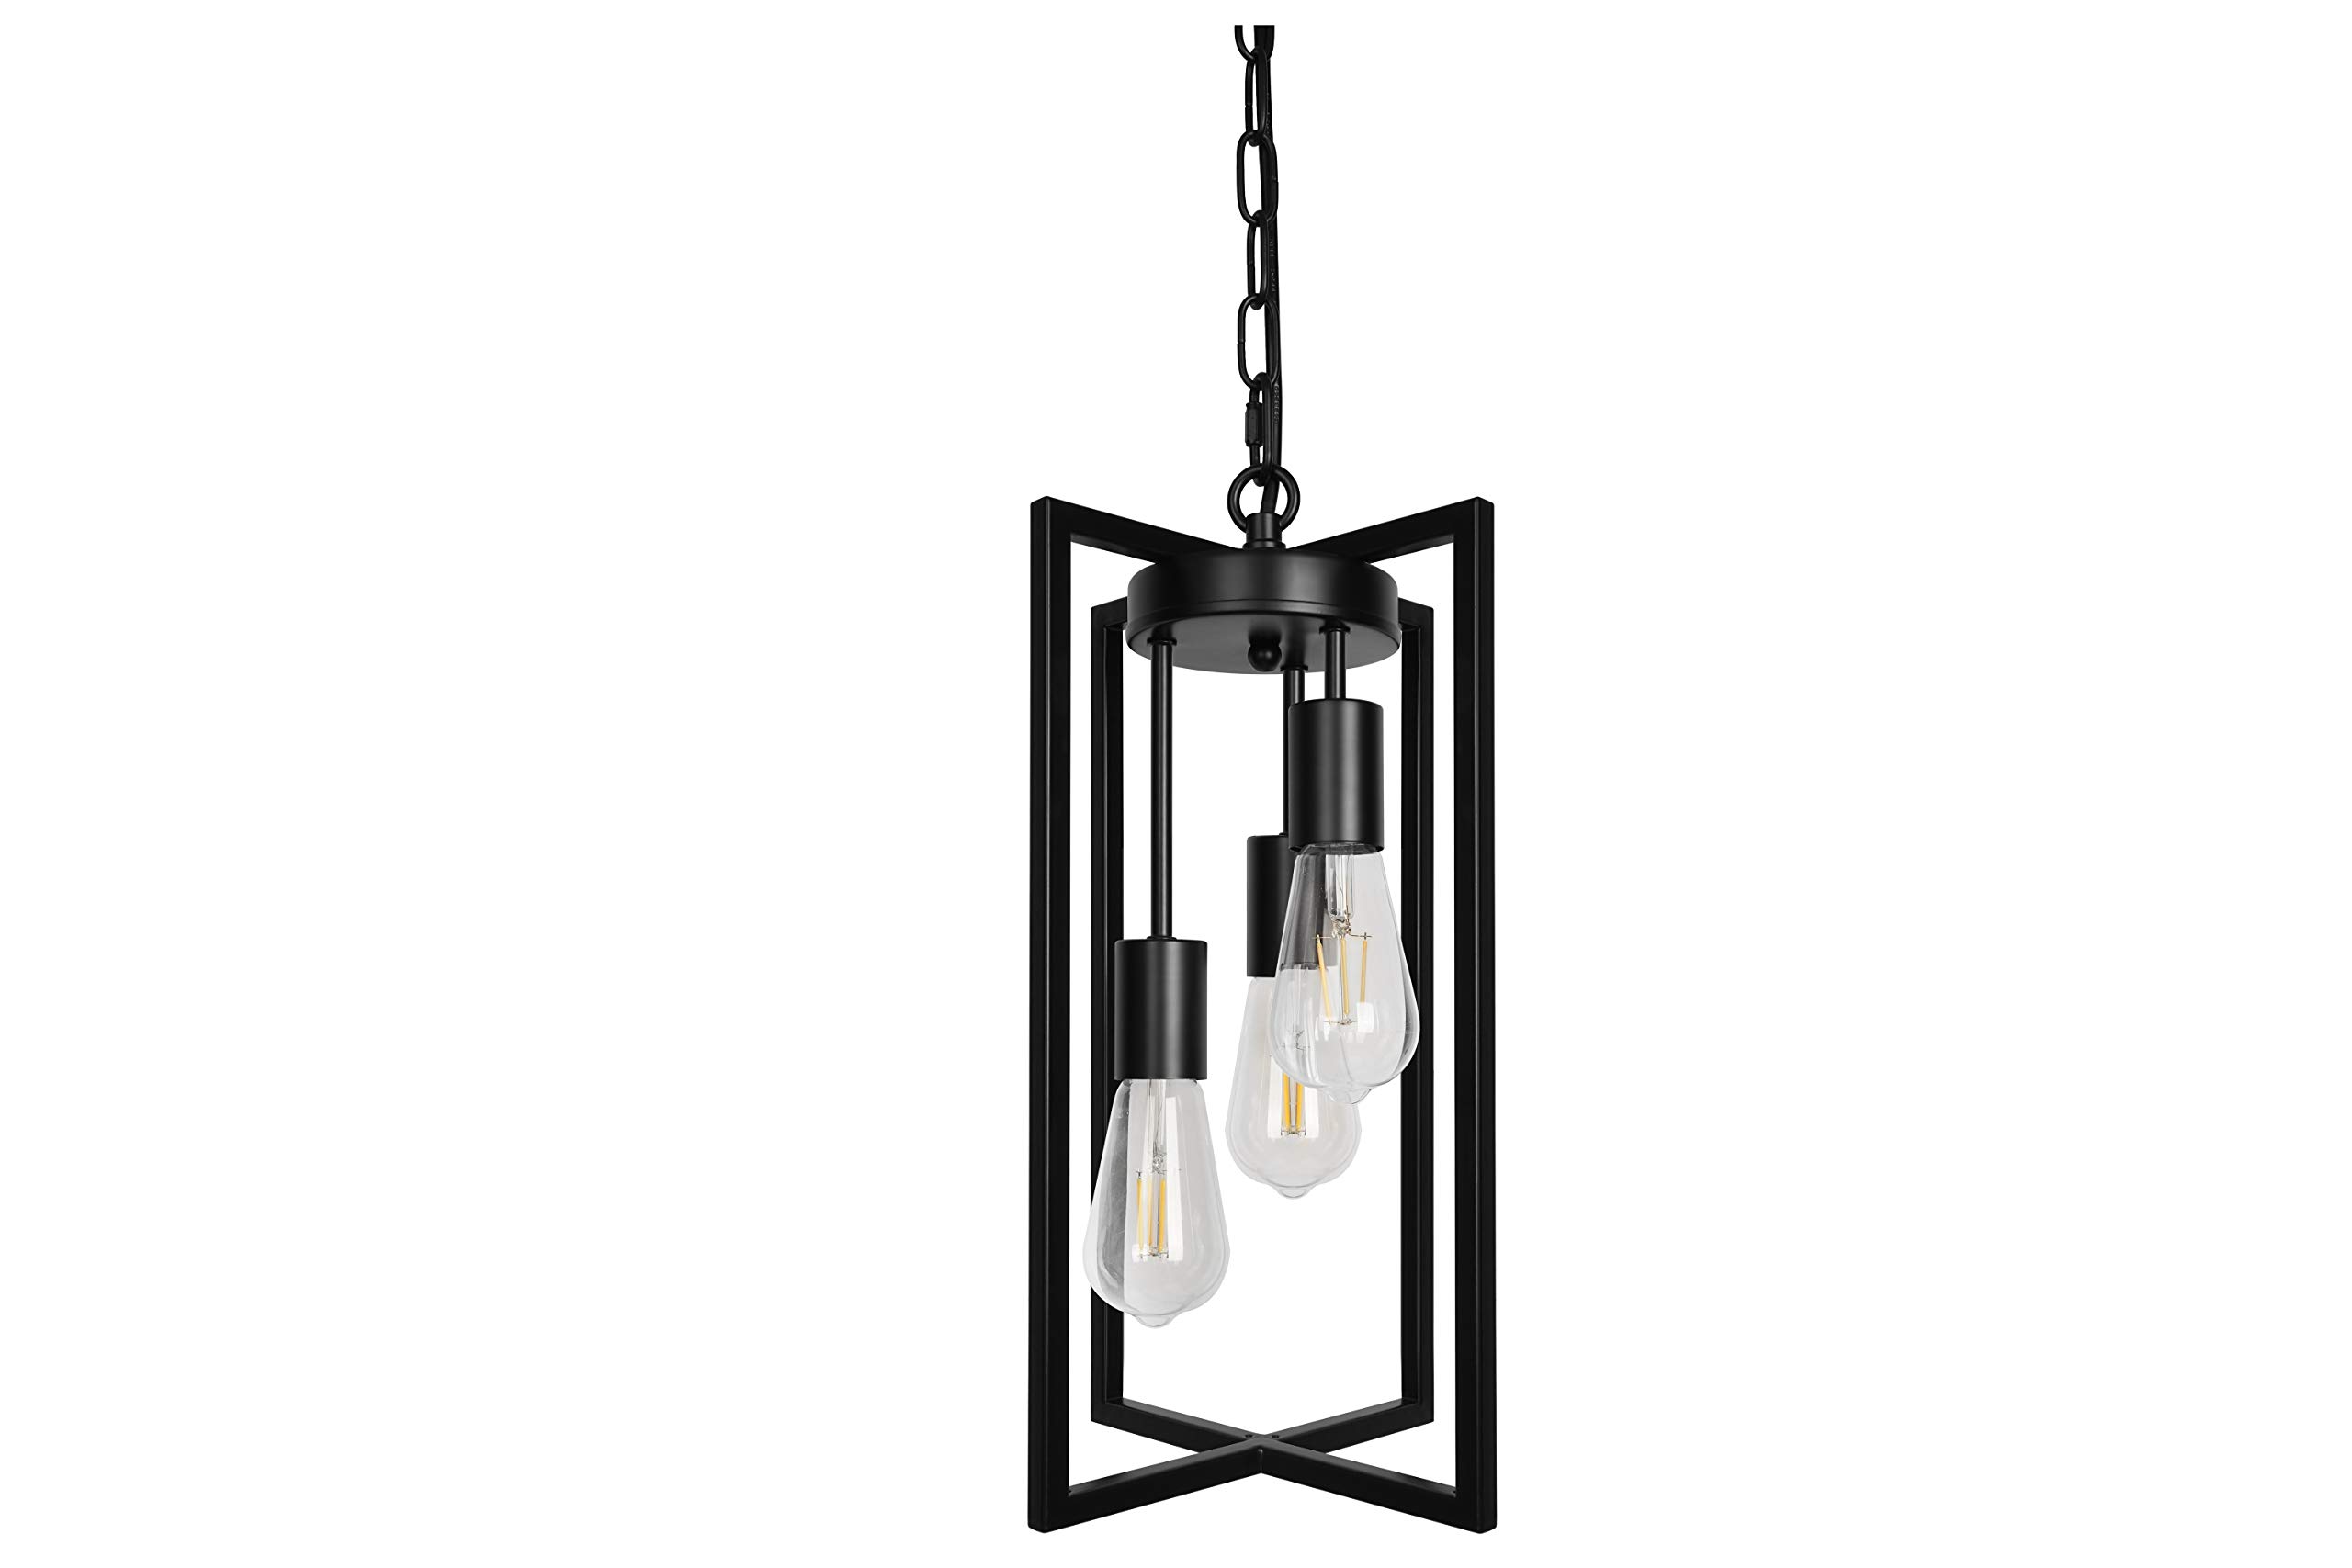 Mipaws Modern Black Industrial Farmhouse Pendant Lighting , Rectangle Metal cage chandelier Hanging Light Fixture for Kitchen Island, D